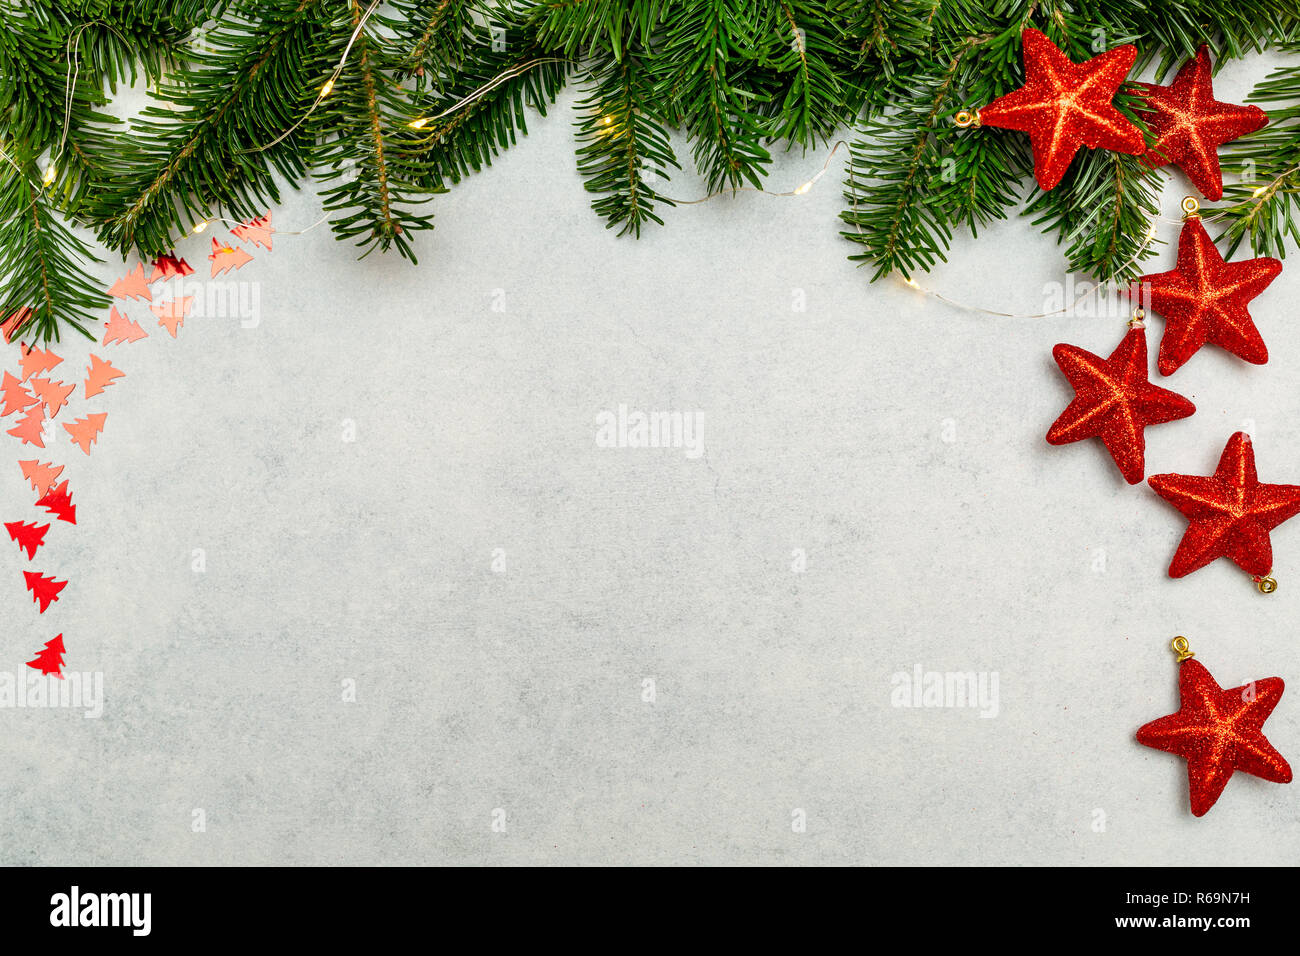 Christmas background with fir tree and red shiny stars on gray concrete table. Top view with copy space. Stock Photo